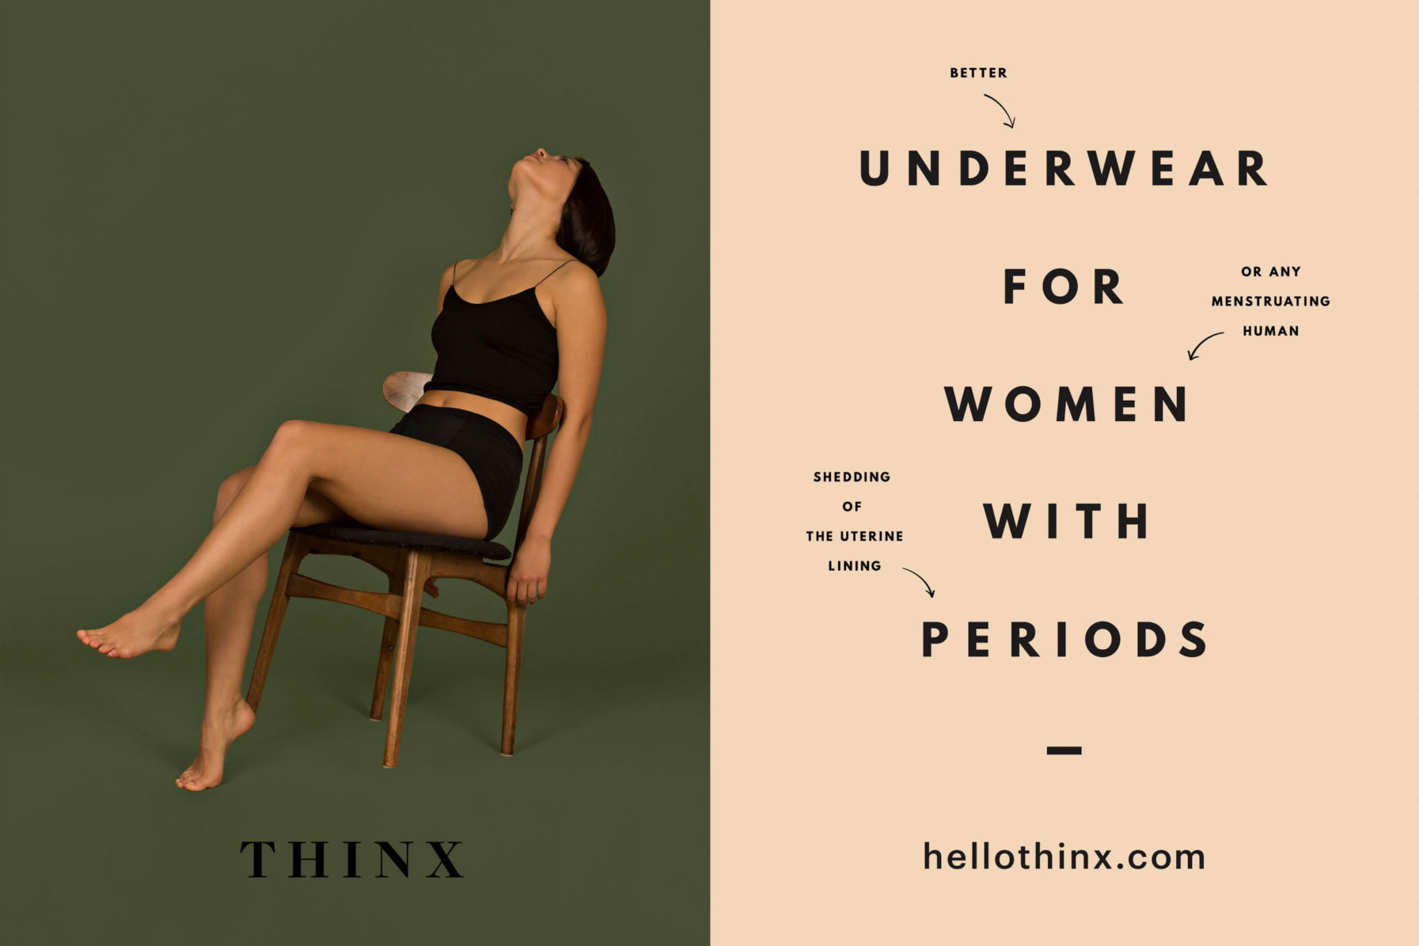 Welcome to the shop, Thinx!